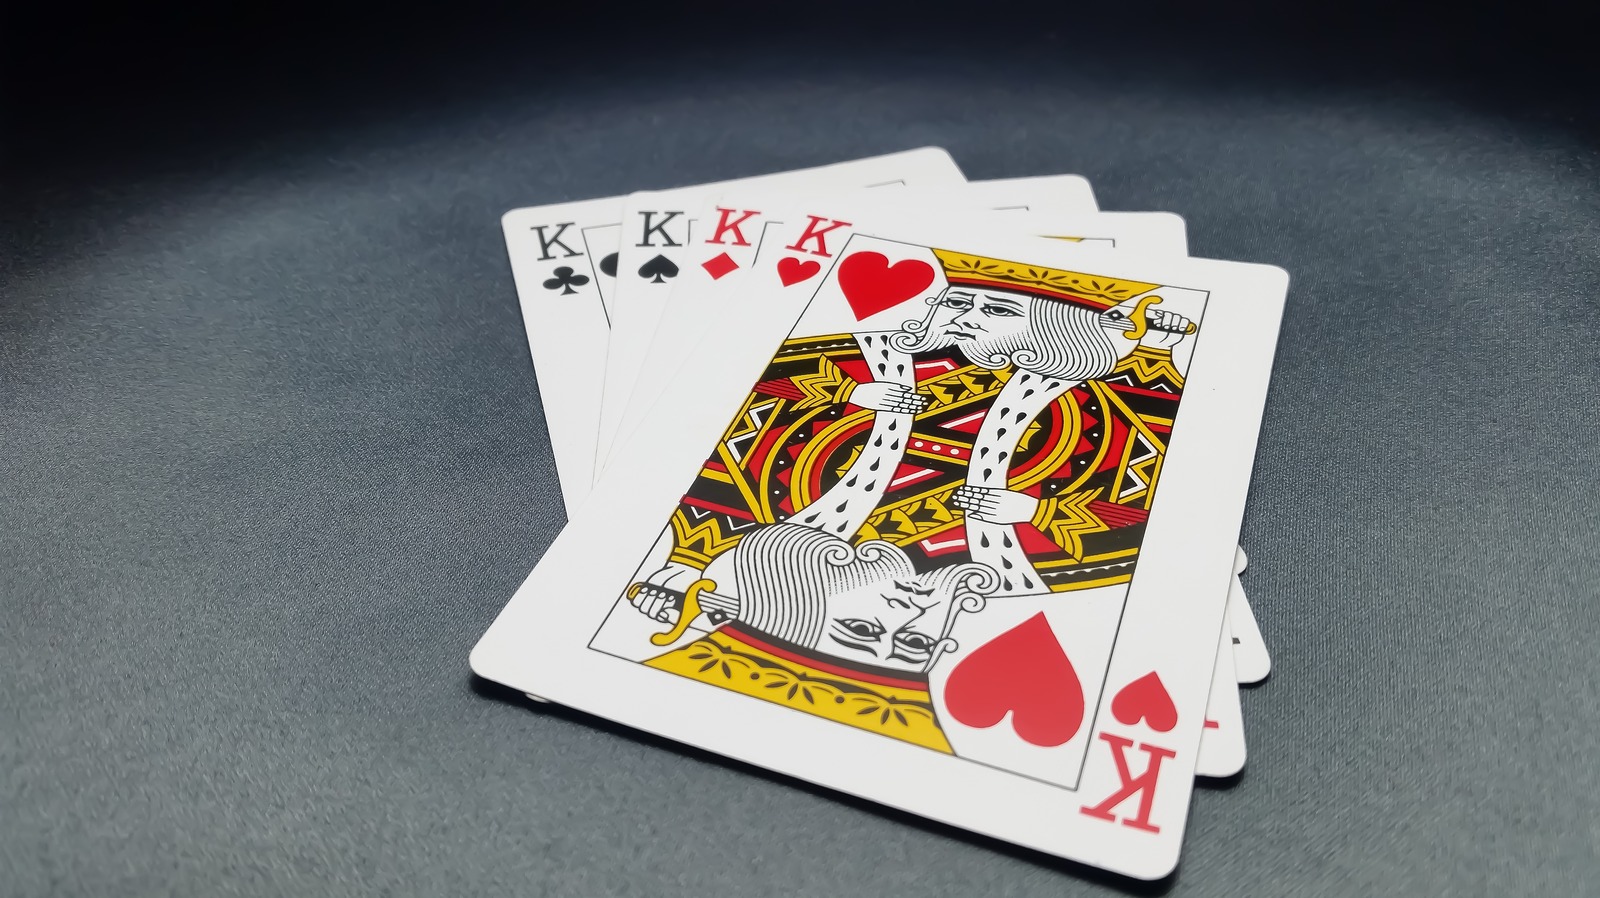 Игры 4 короля. Four of a kind. King of Cards Tower. Cibola playing Cards by Kings Wild Project.